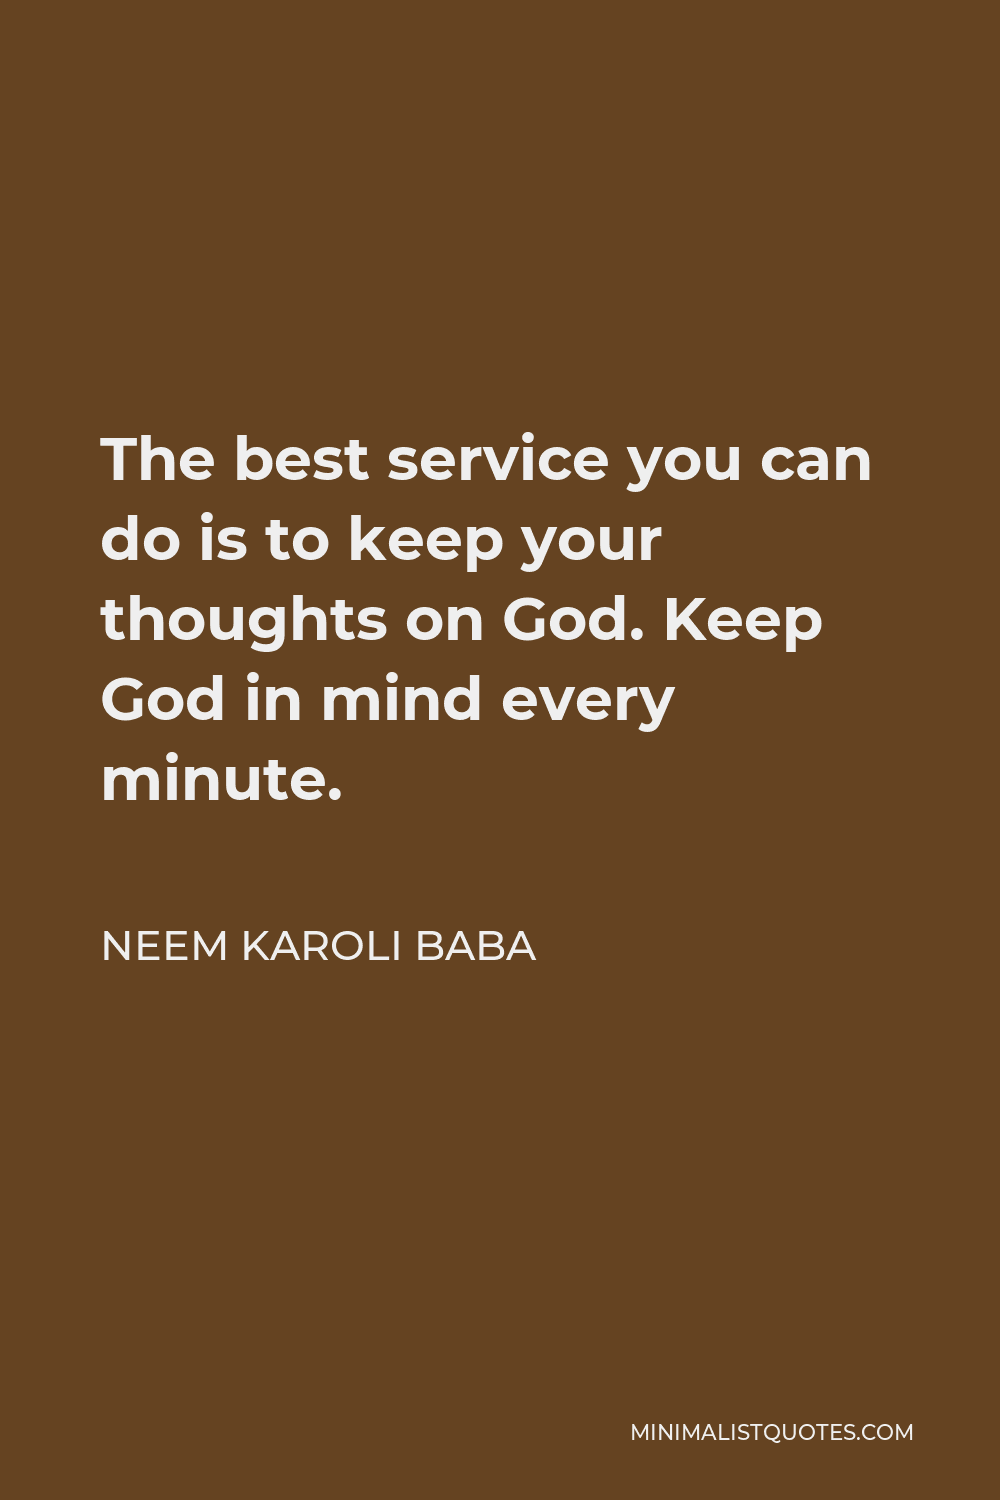 Neem Karoli Baba Quote - The best service you can do is to keep your thoughts on God. Keep God in mind every minute.